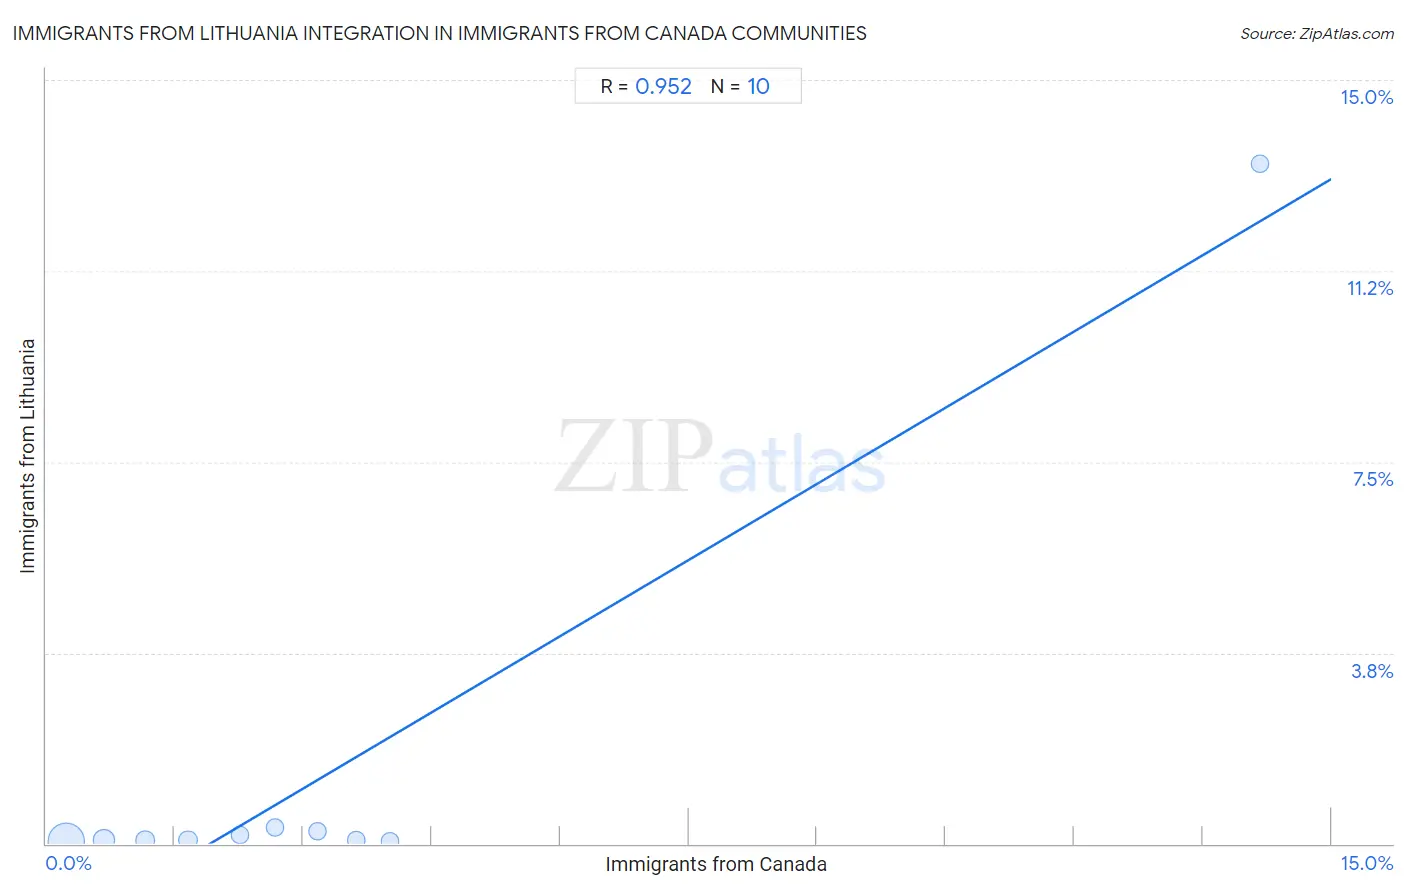 Immigrants from Canada Integration in Immigrants from Lithuania Communities